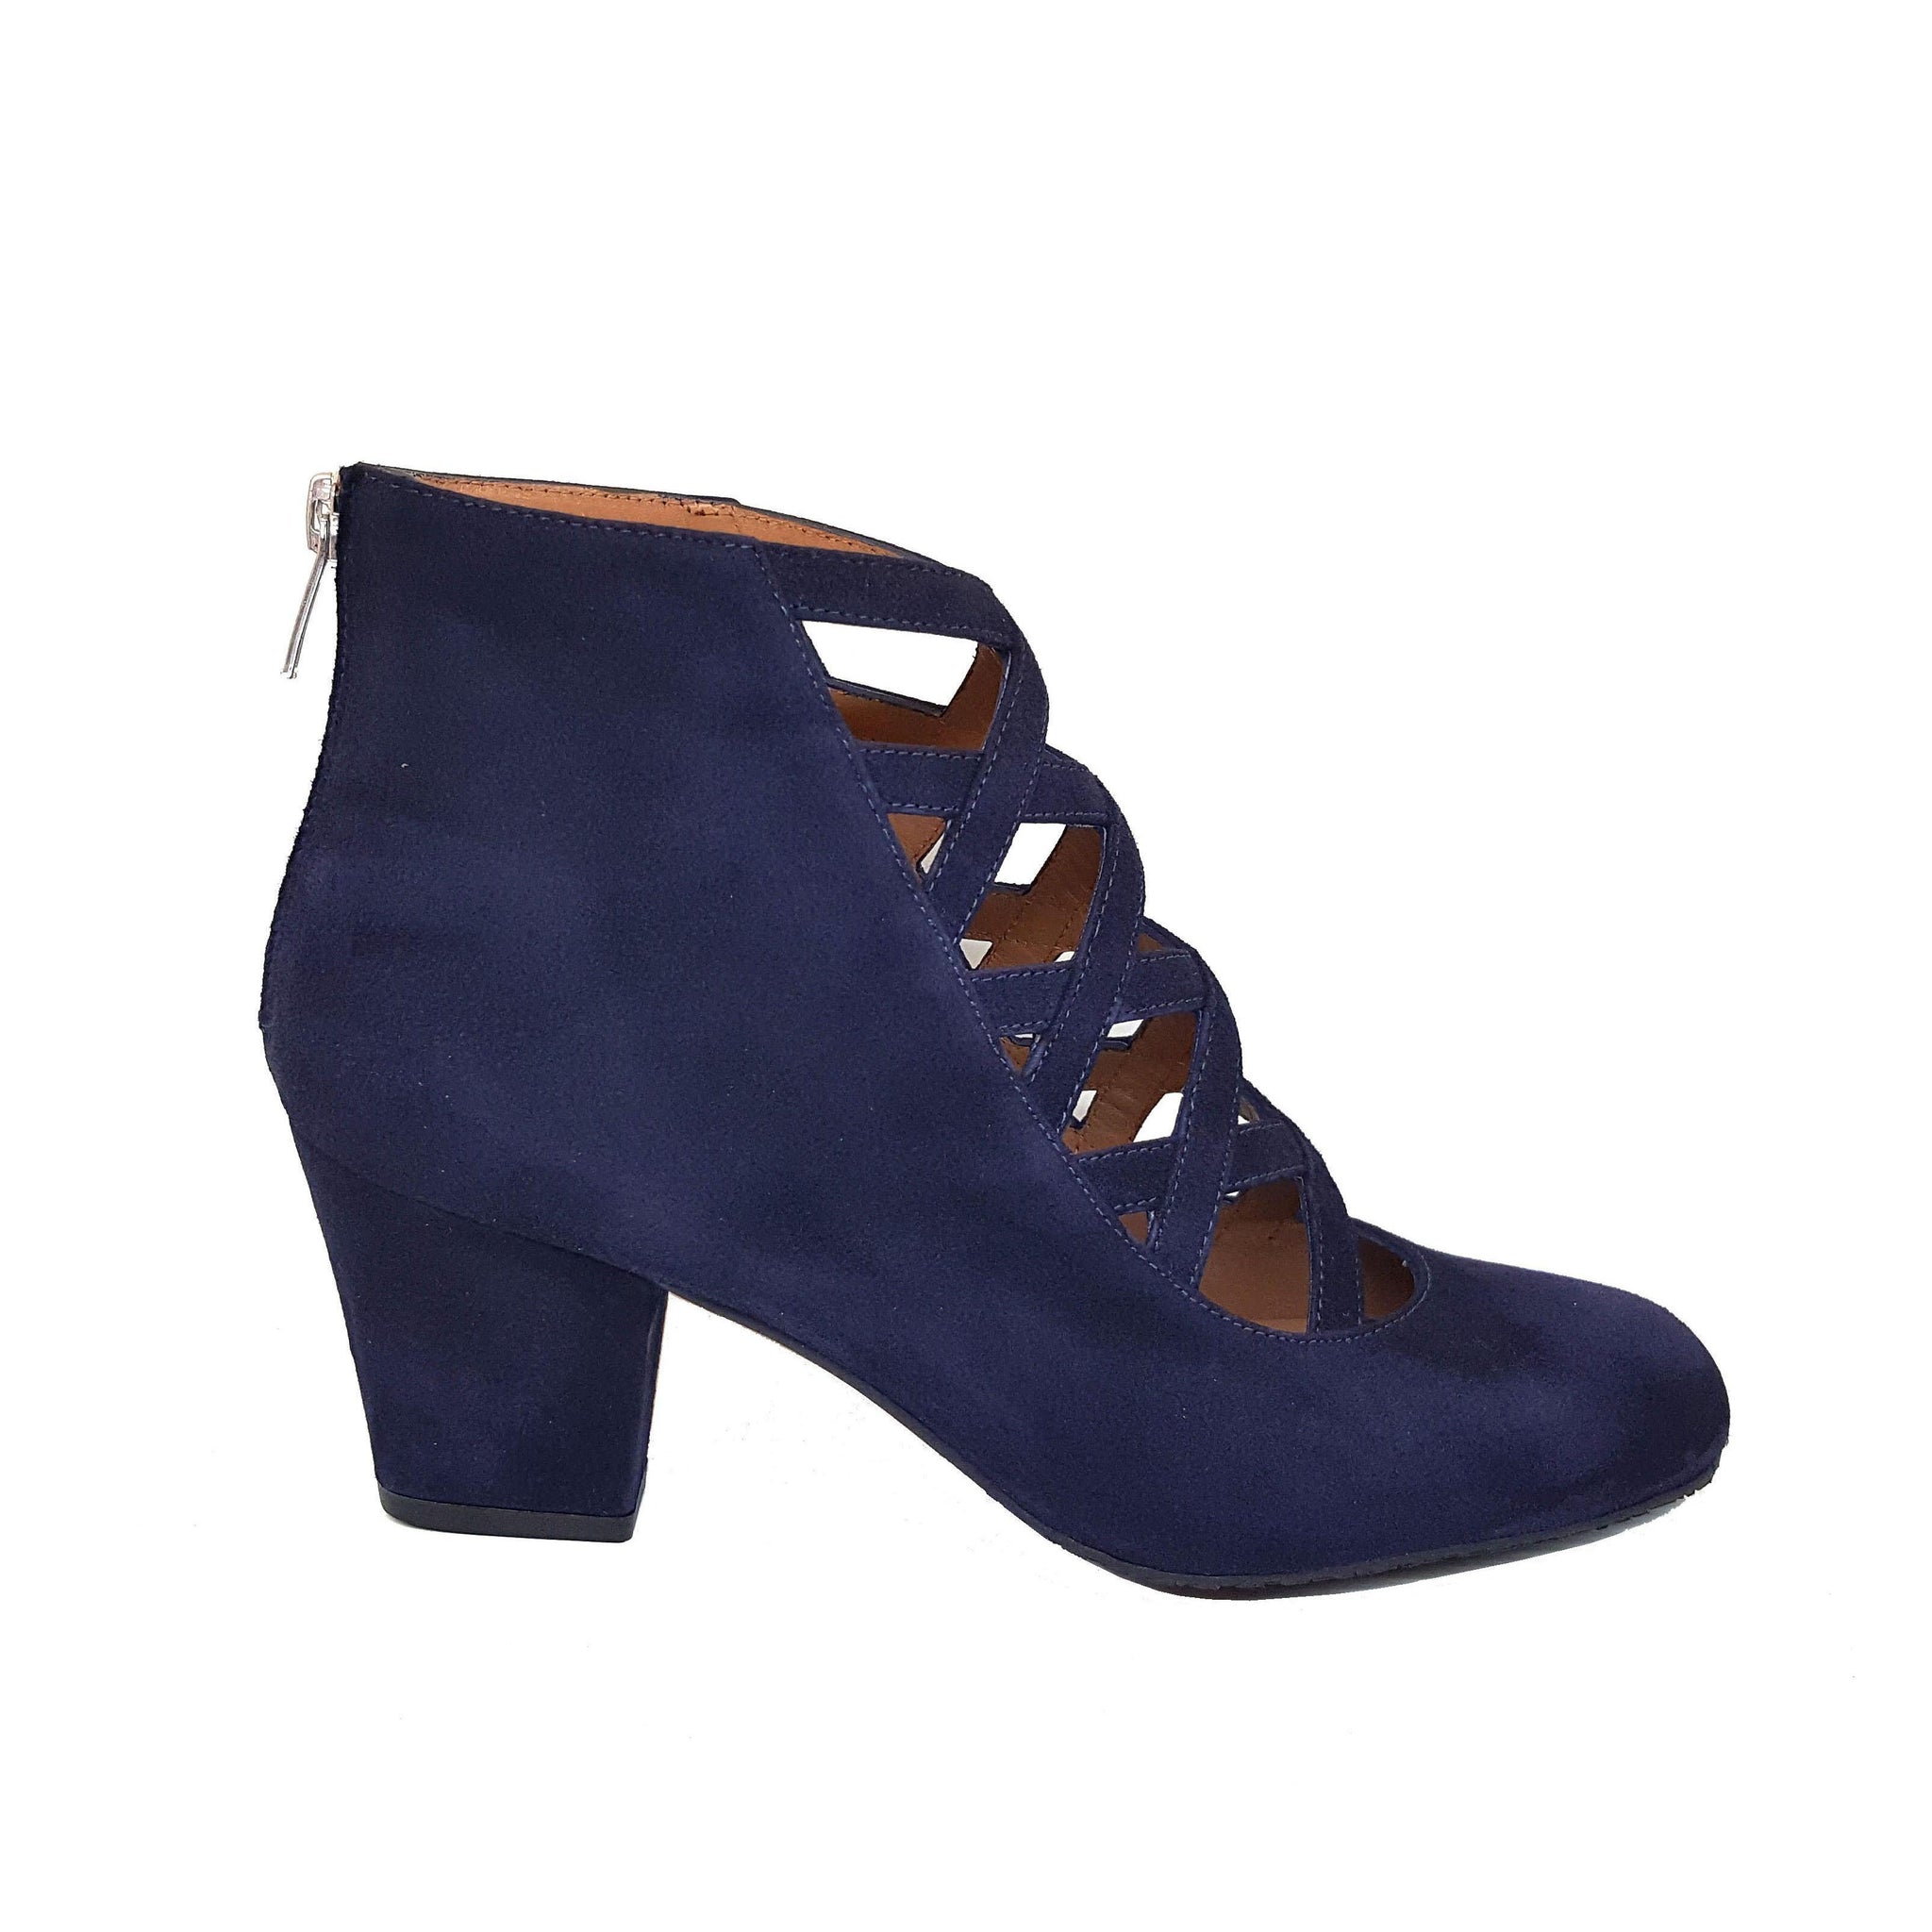 XUPPA Navy Blue Leather Suede